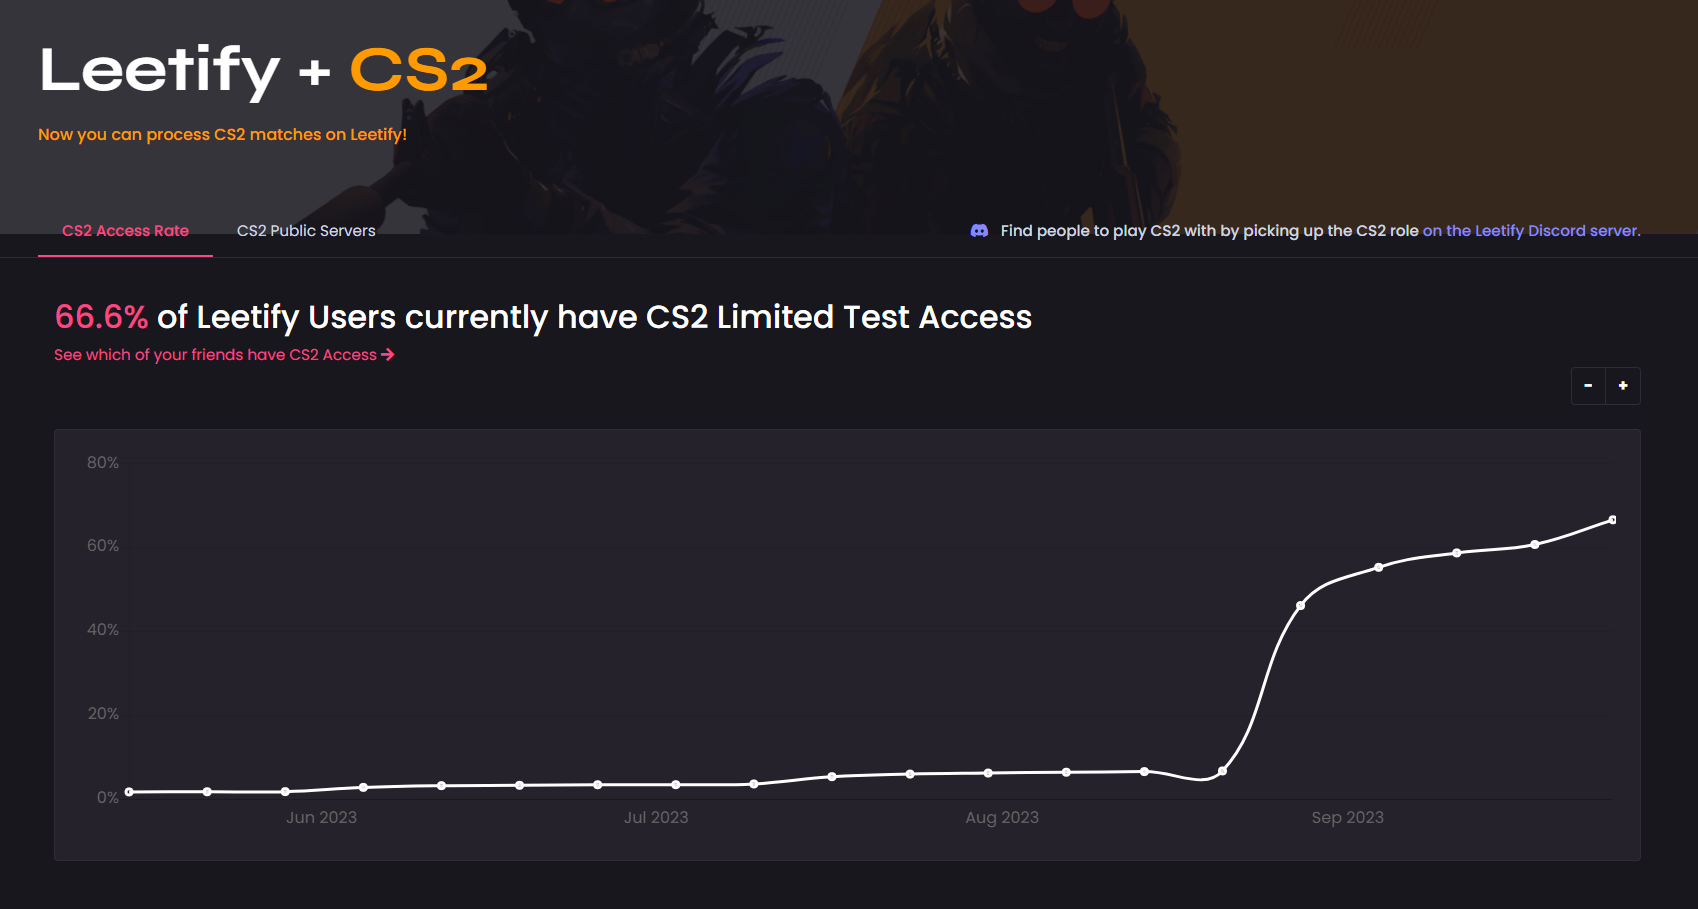 CS2 Limited Test Access Rates